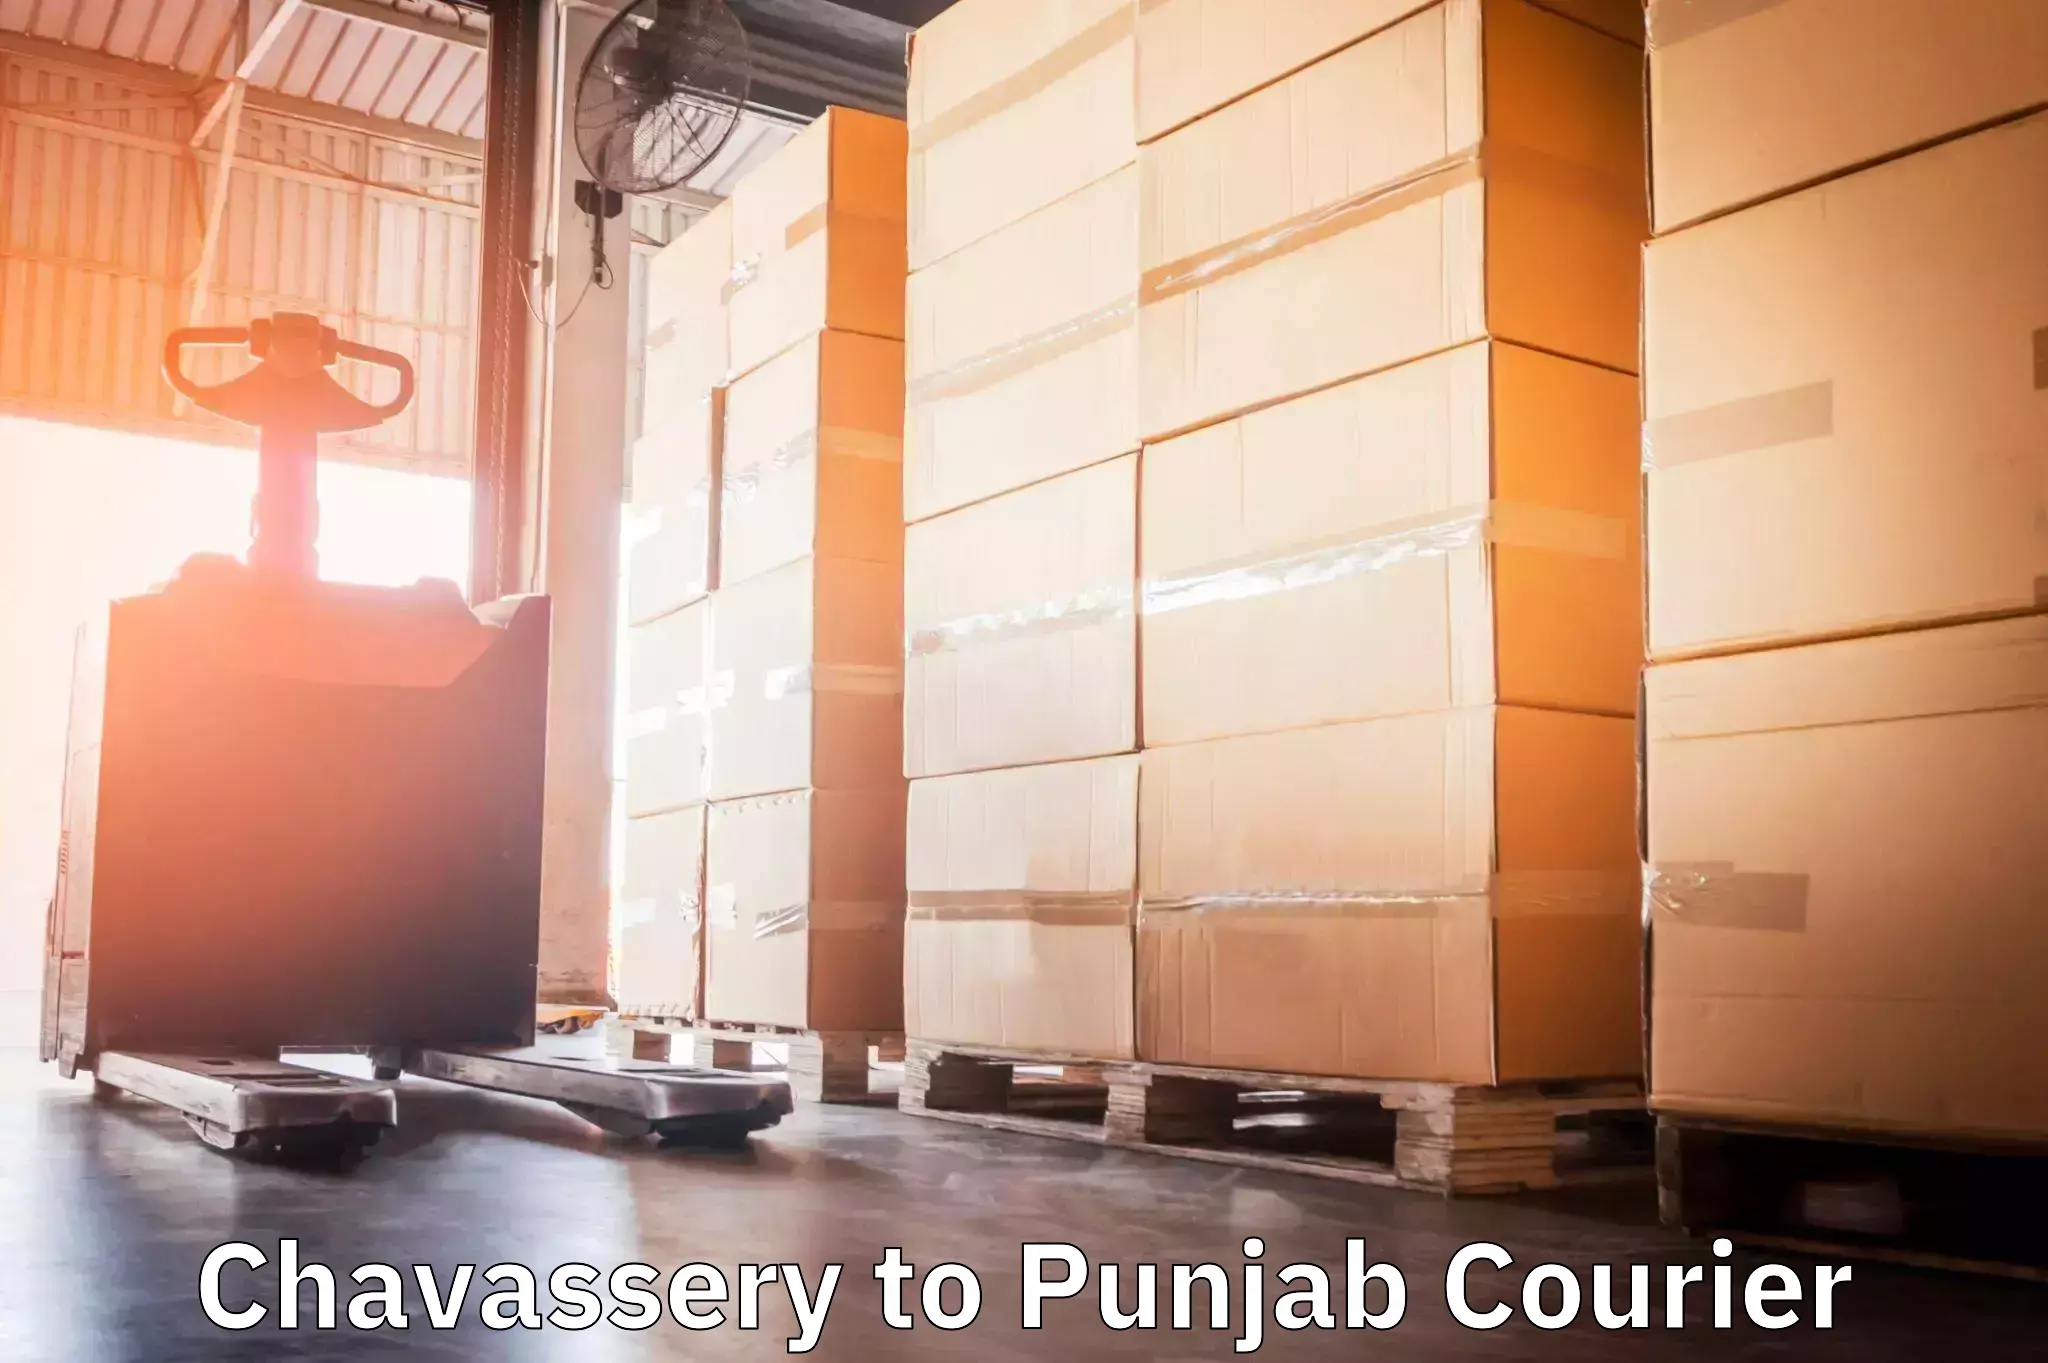 Multi-national courier services Chavassery to Anandpur Sahib